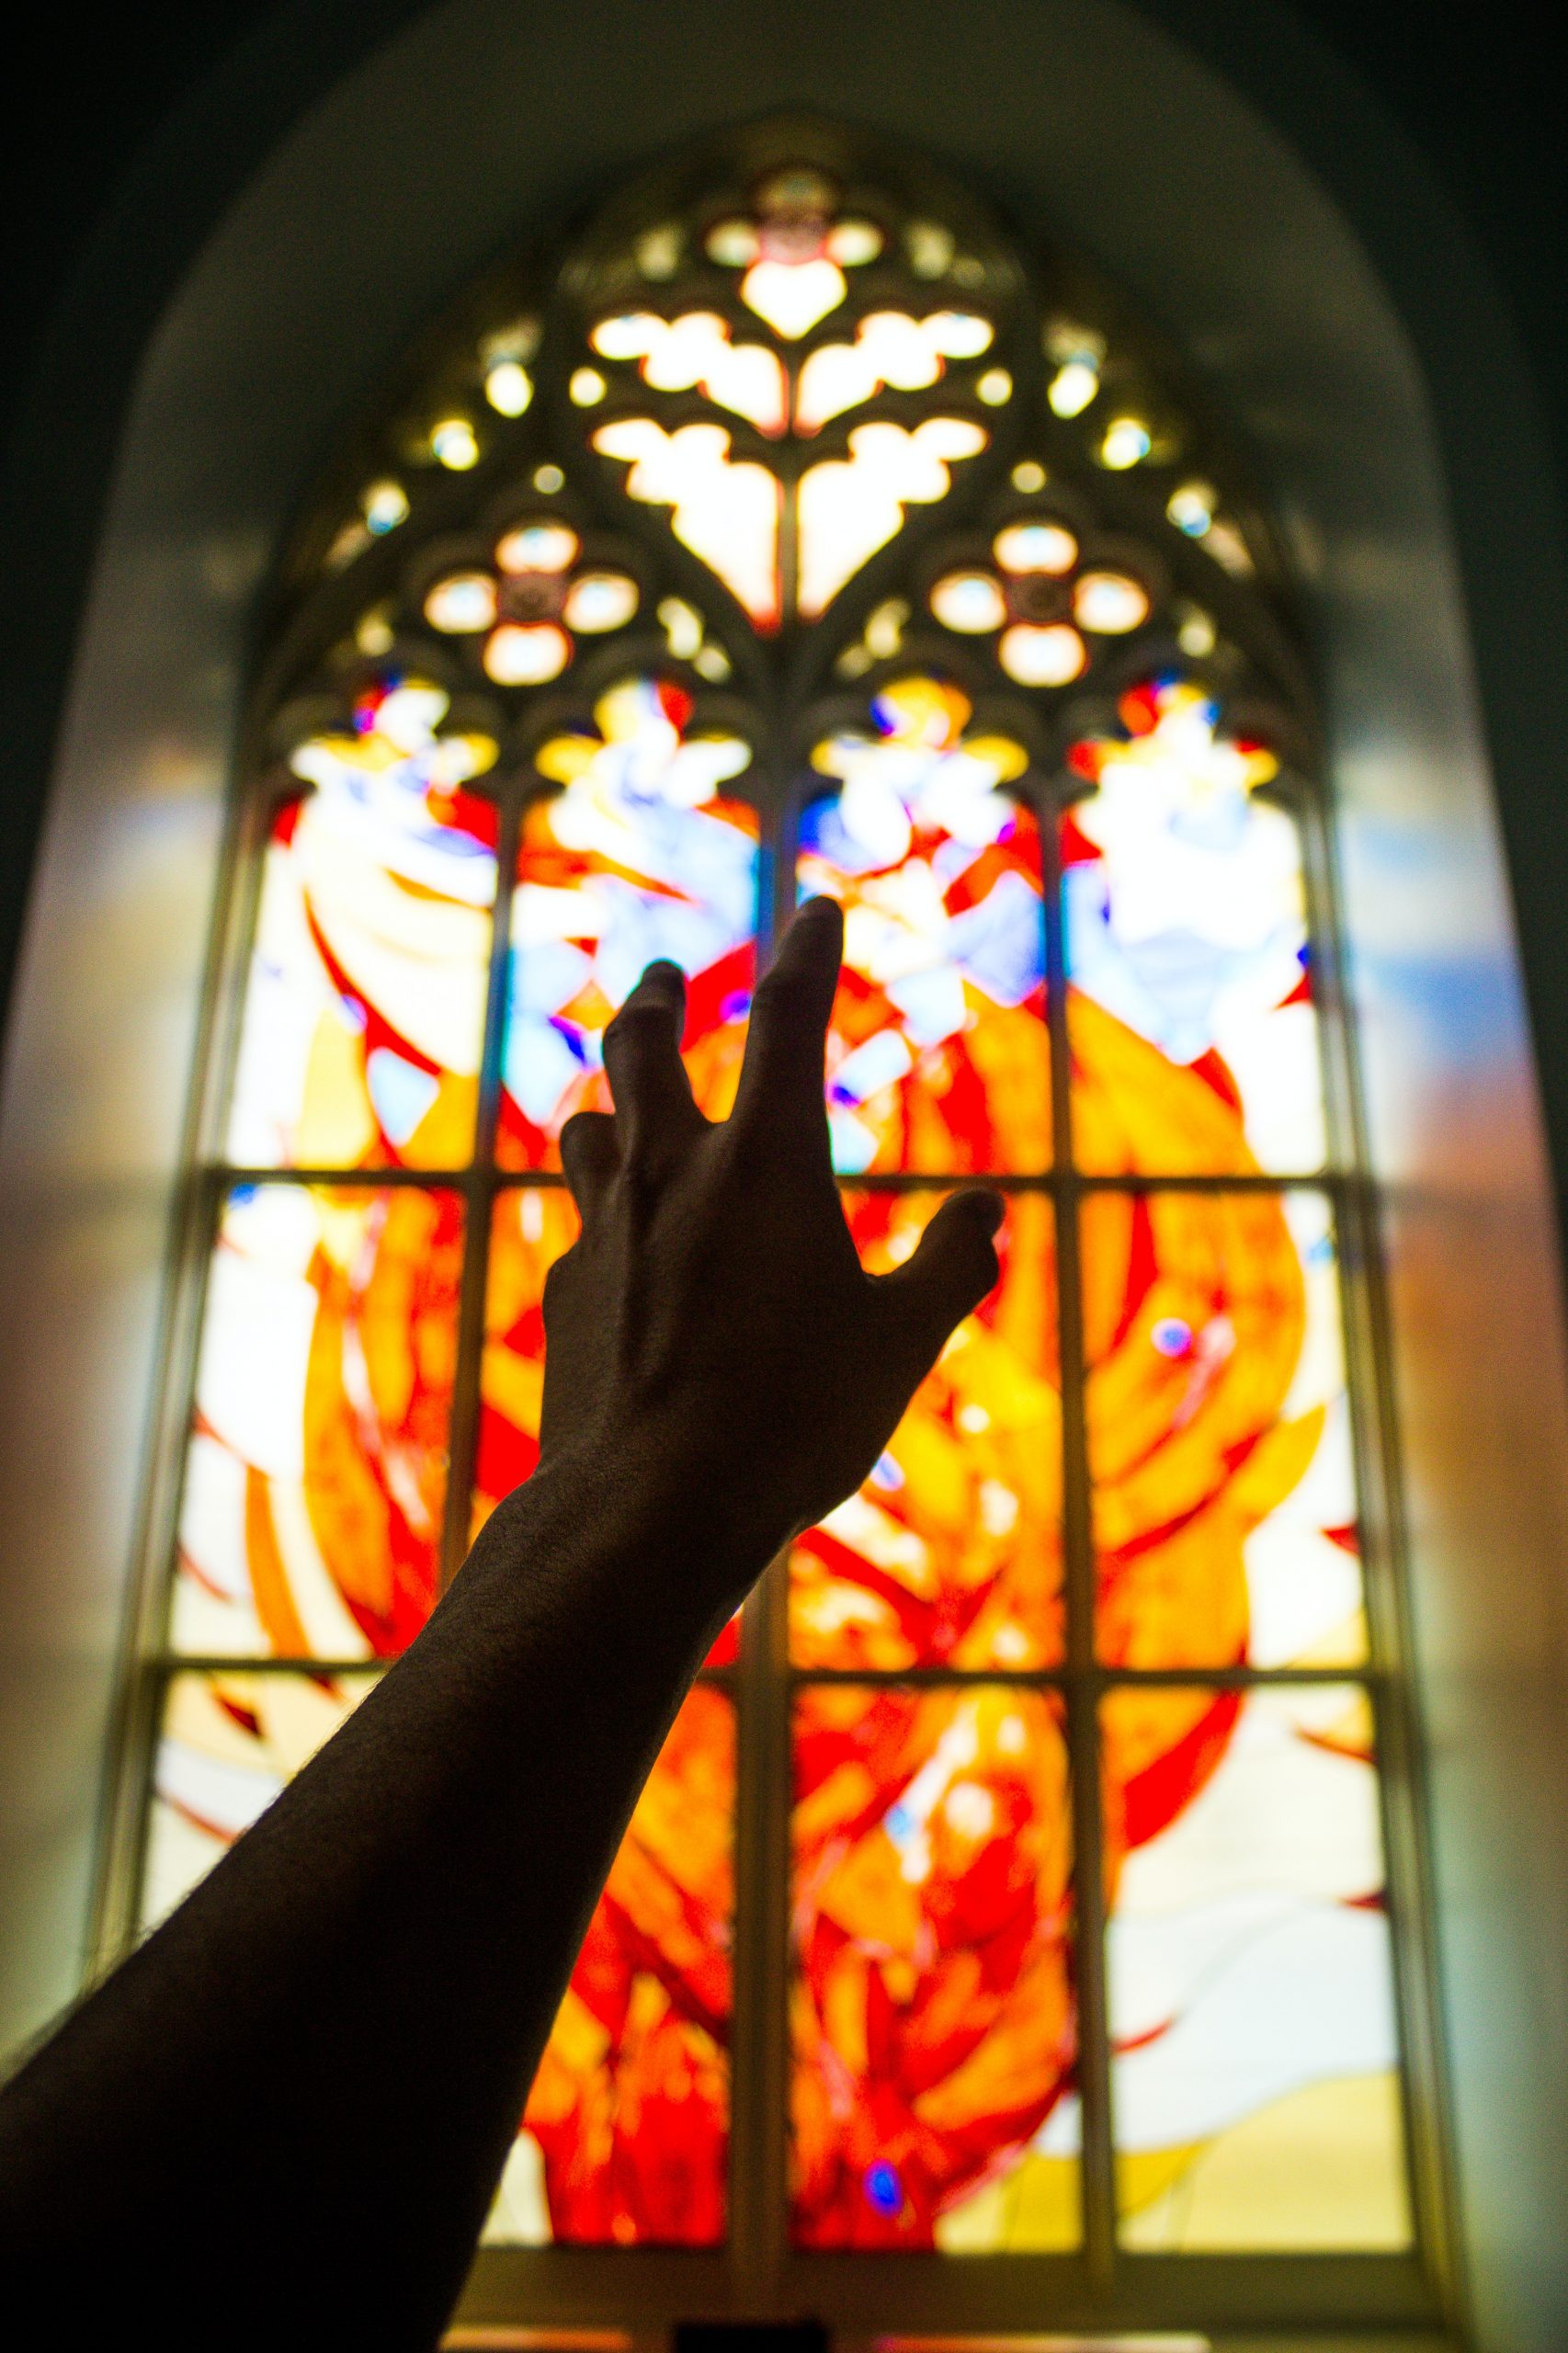 Hand in front of a church's stained glass window